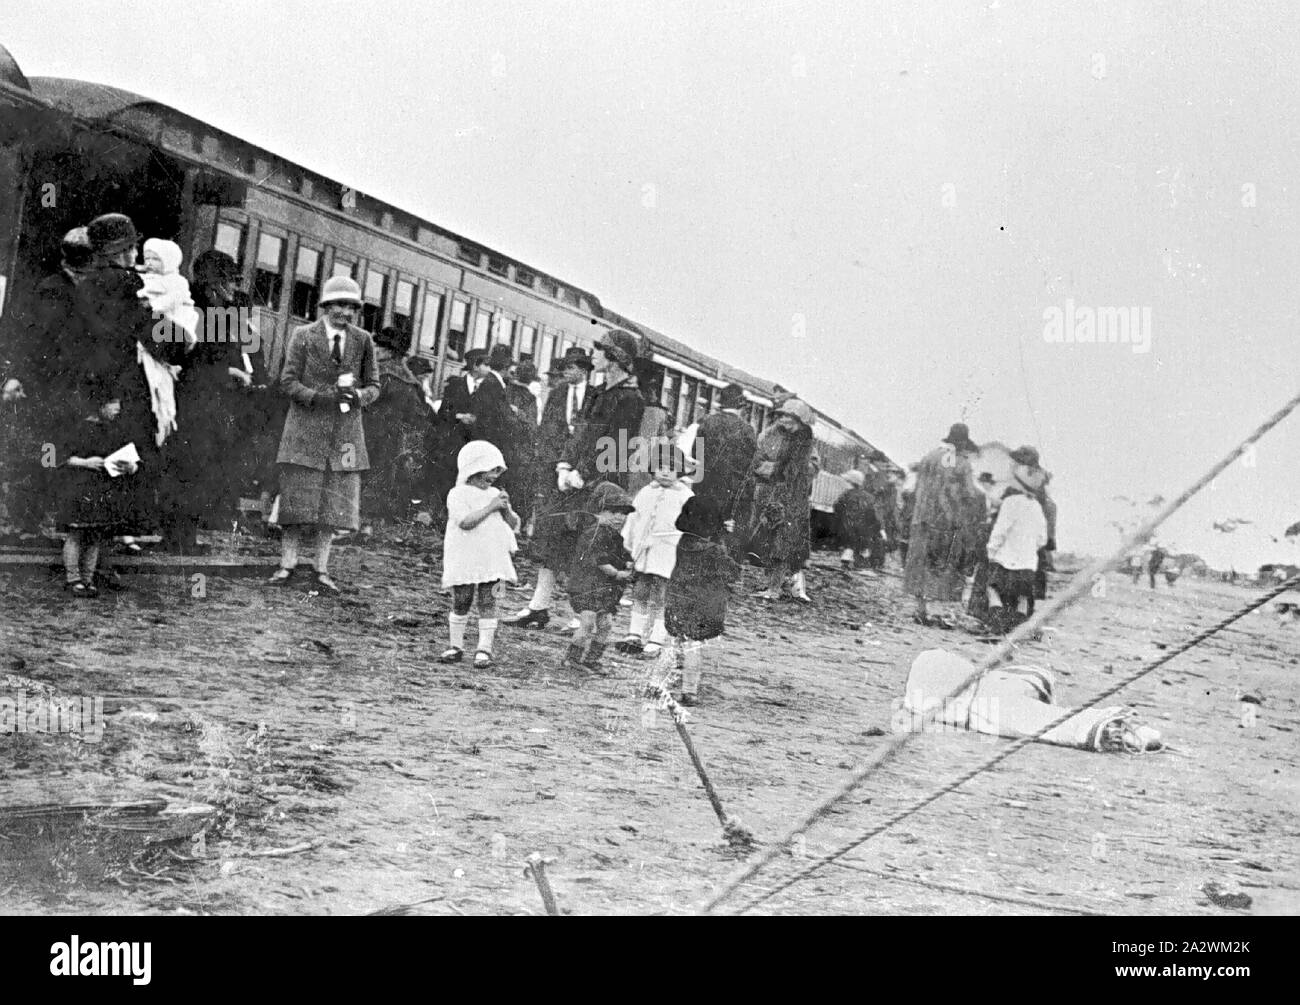 Negative - Group Inspecting 'Better Farming Train', Underbool, Victoria, 1927, A group, predominantly female, beside railway carriages. This was the 'Better Farming Train'. The women a wearing skirts and jackets, and dress shoes. Some of the women are wearing hats. A group of children are standing in front of the women, the girls are wearing short dresses and long socks, and the boys are wearing shorts and jackets. On the left, a woman is holding a baby which is wrapped Stock Photo